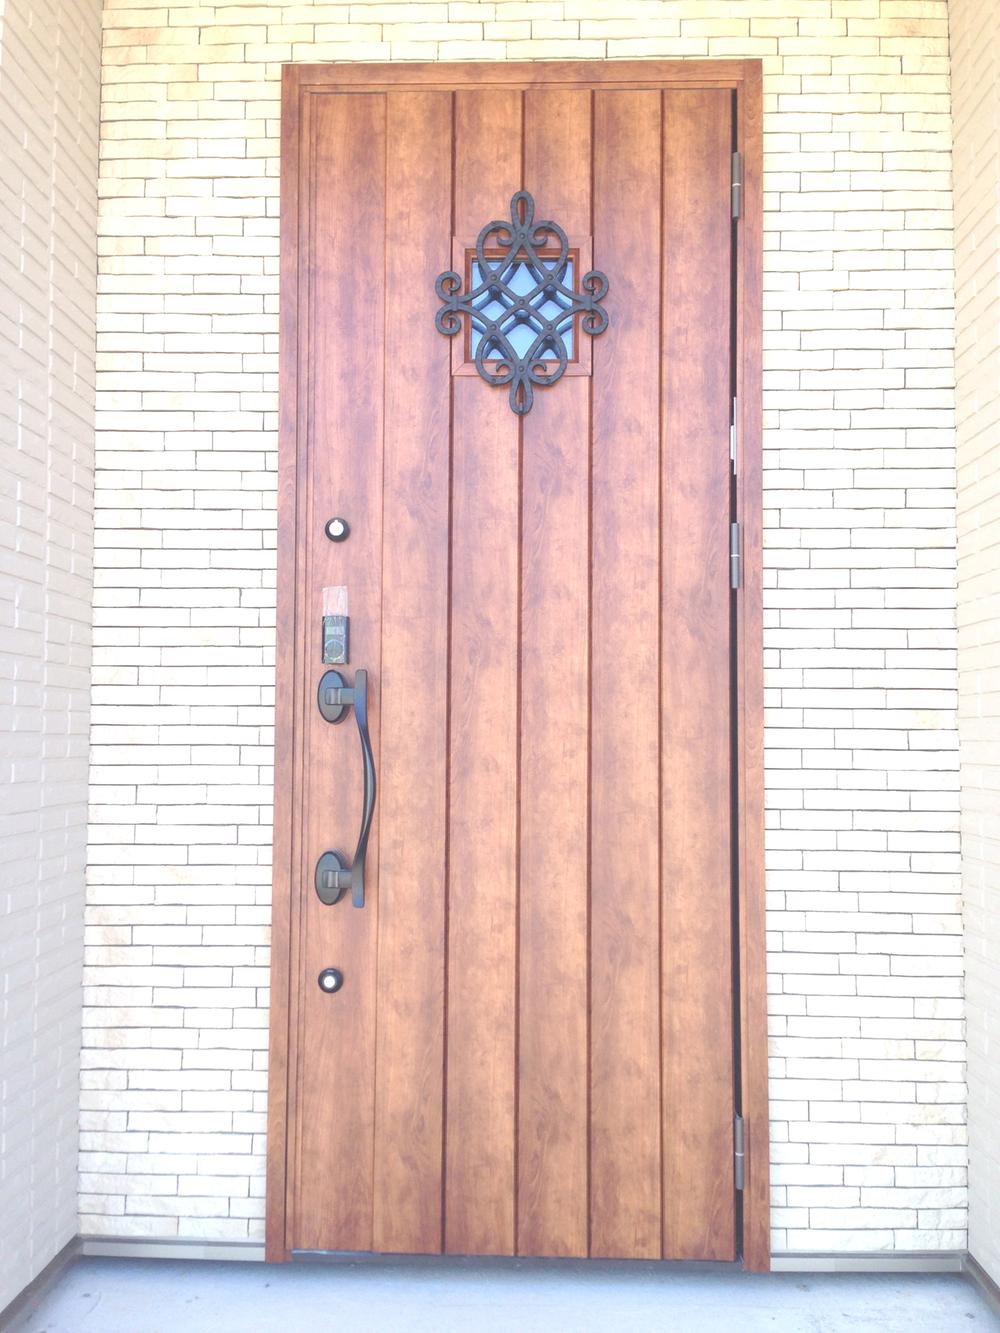 Entrance. 13-6 No. land Entrance door with a profound feeling in wood carving Local (10 May 2013) Shooting